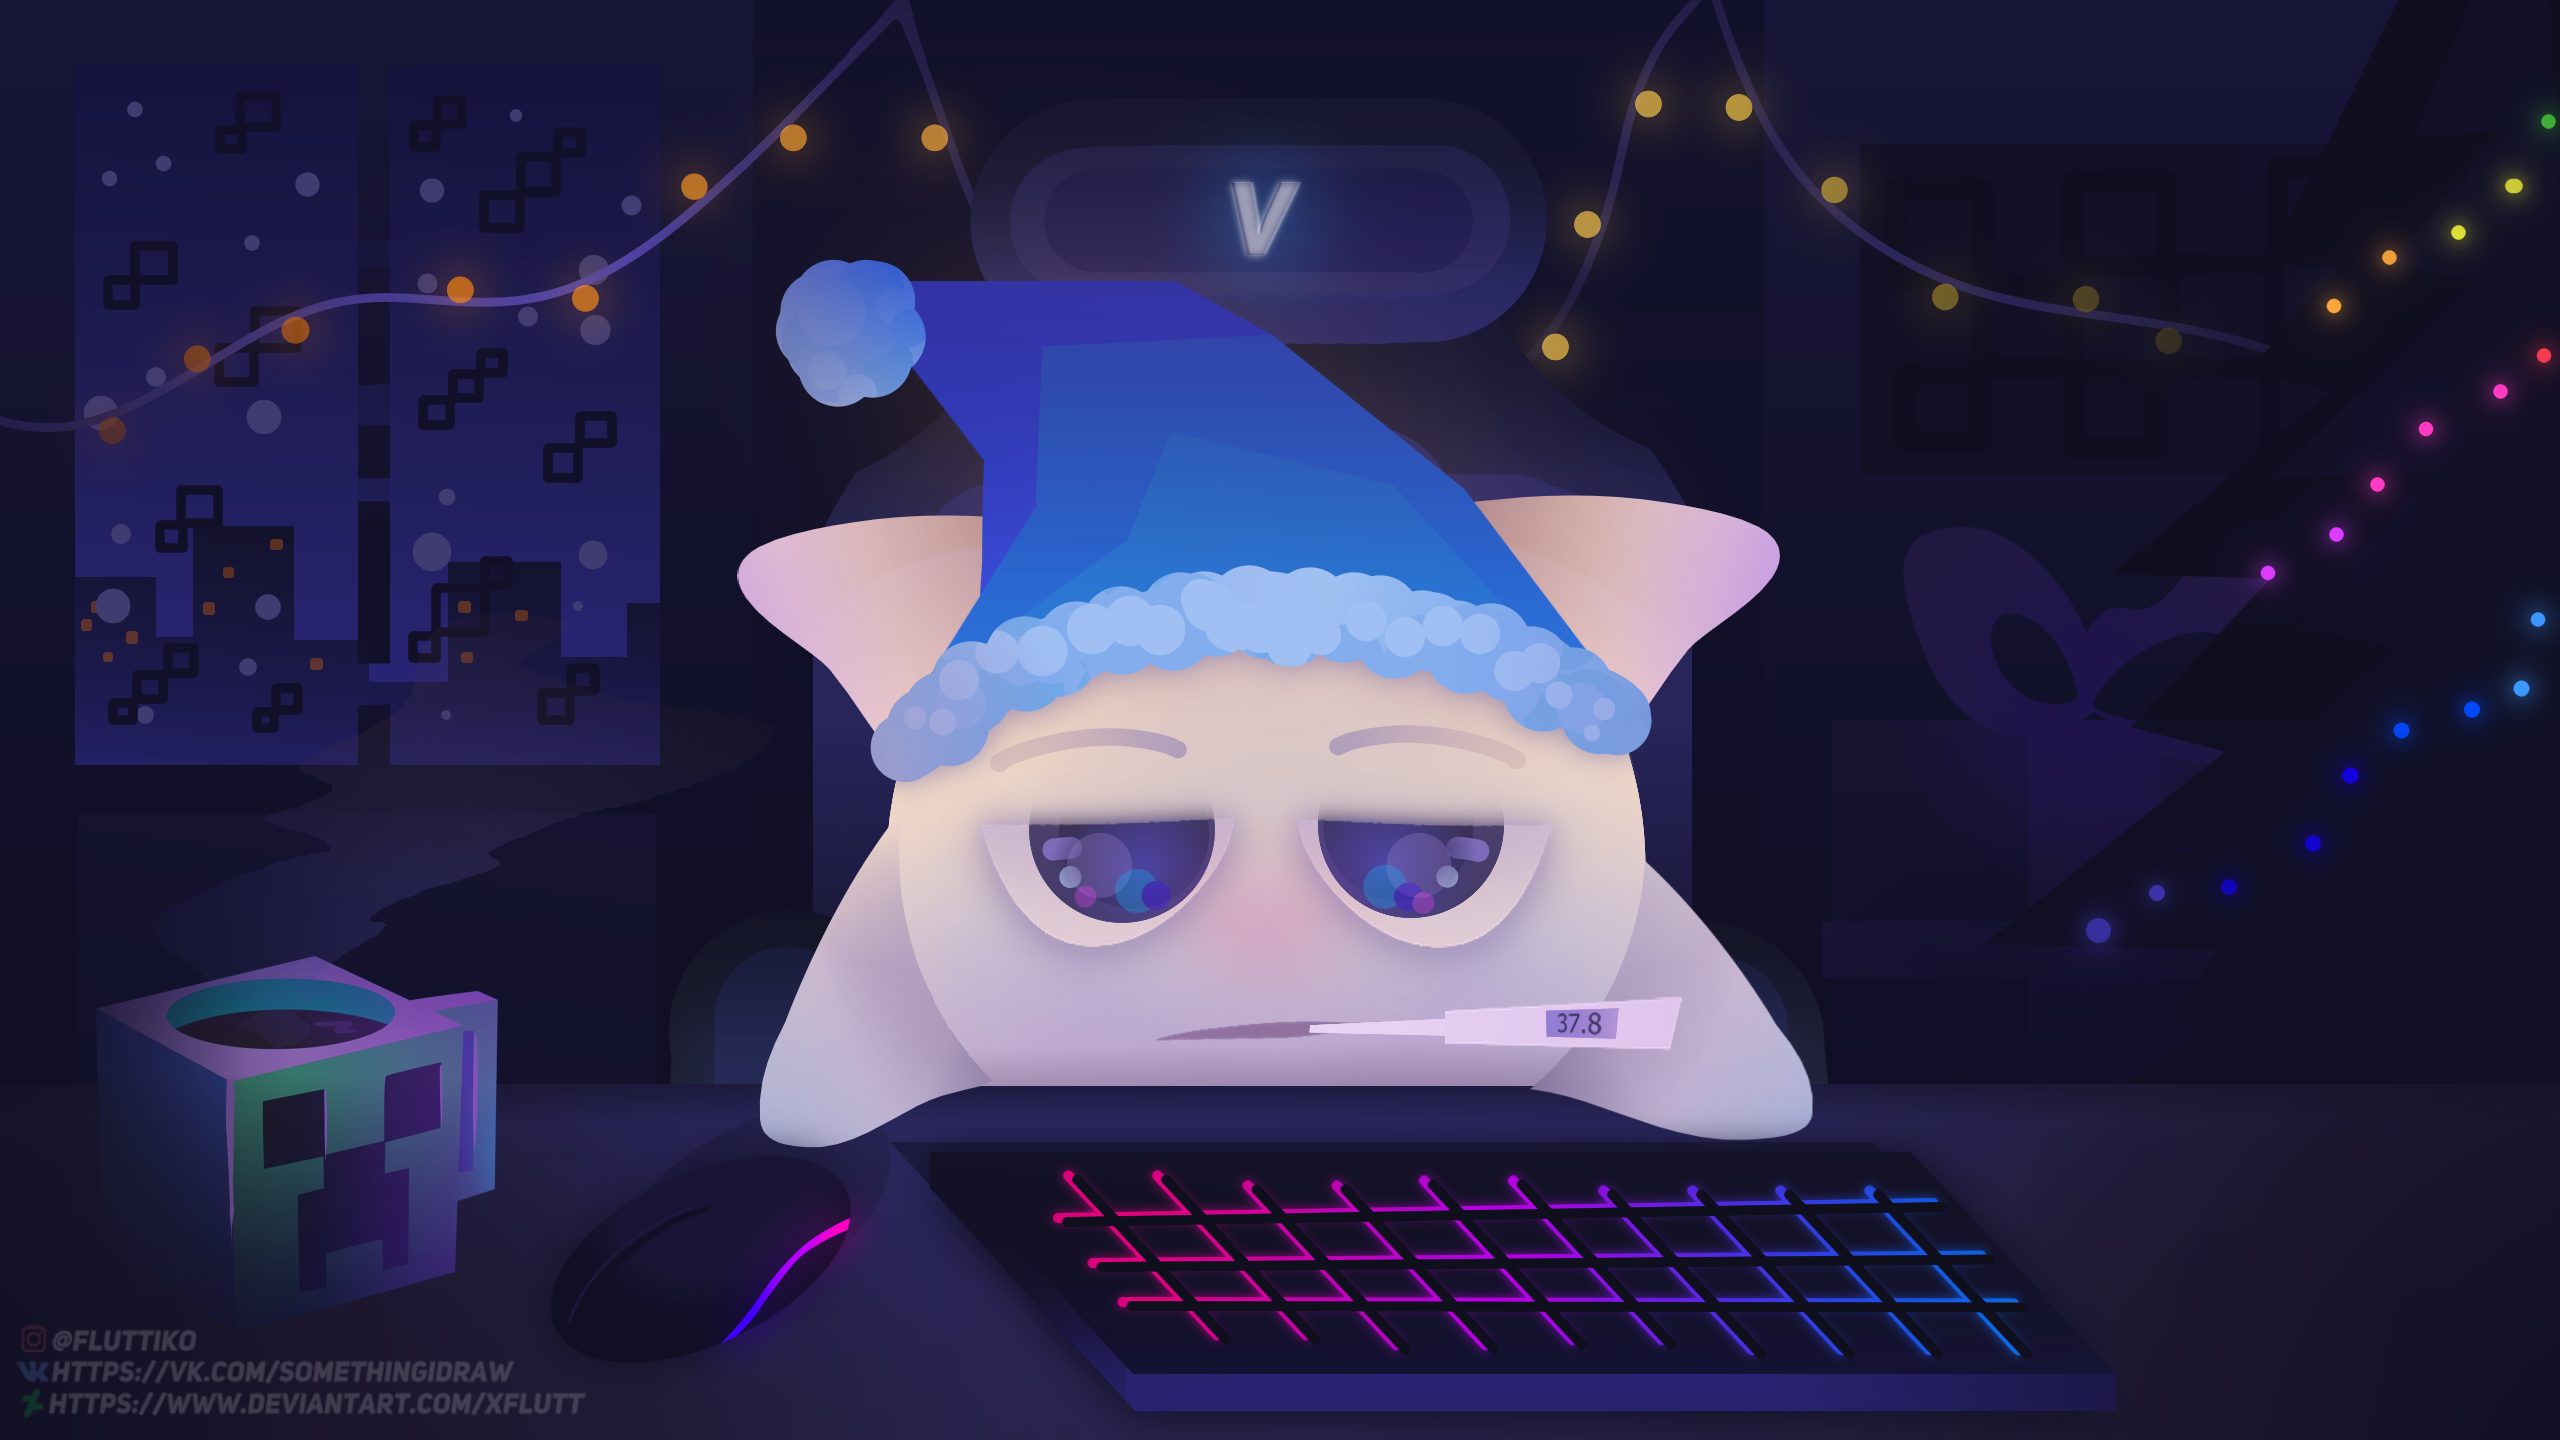 General 2560x1440 neon night hat mouse pad keyboards watermarked sleepy looking at viewer sitting lights thermometer digital art indoors